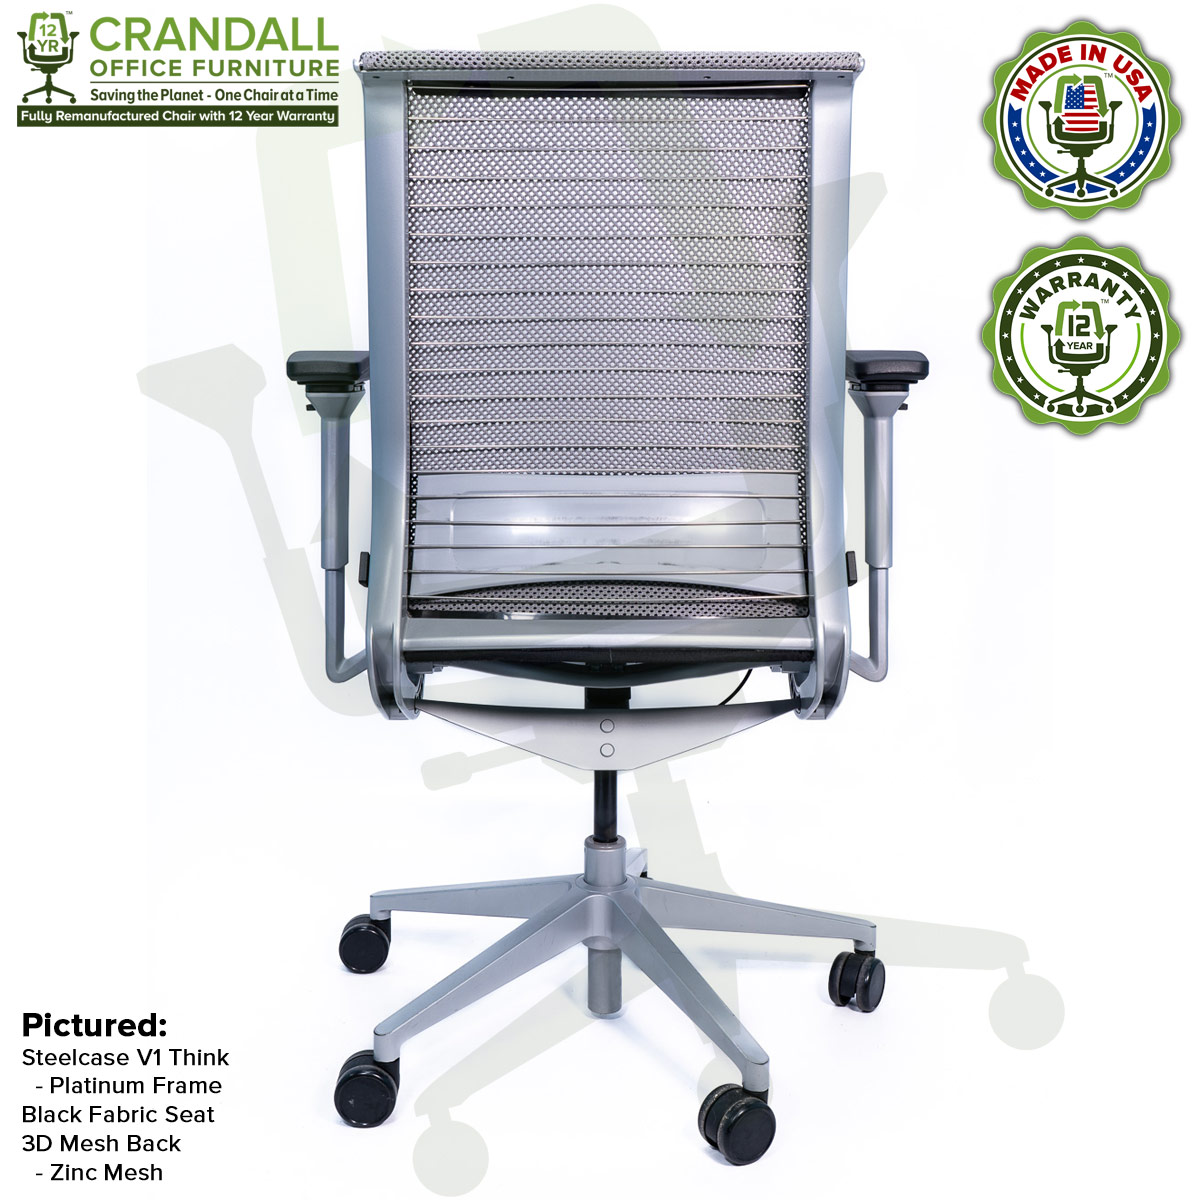 Crandall Office Furniture Remanufactured Steelcase Think Chair with 12 Year Warranty - Platinum Frame - 06